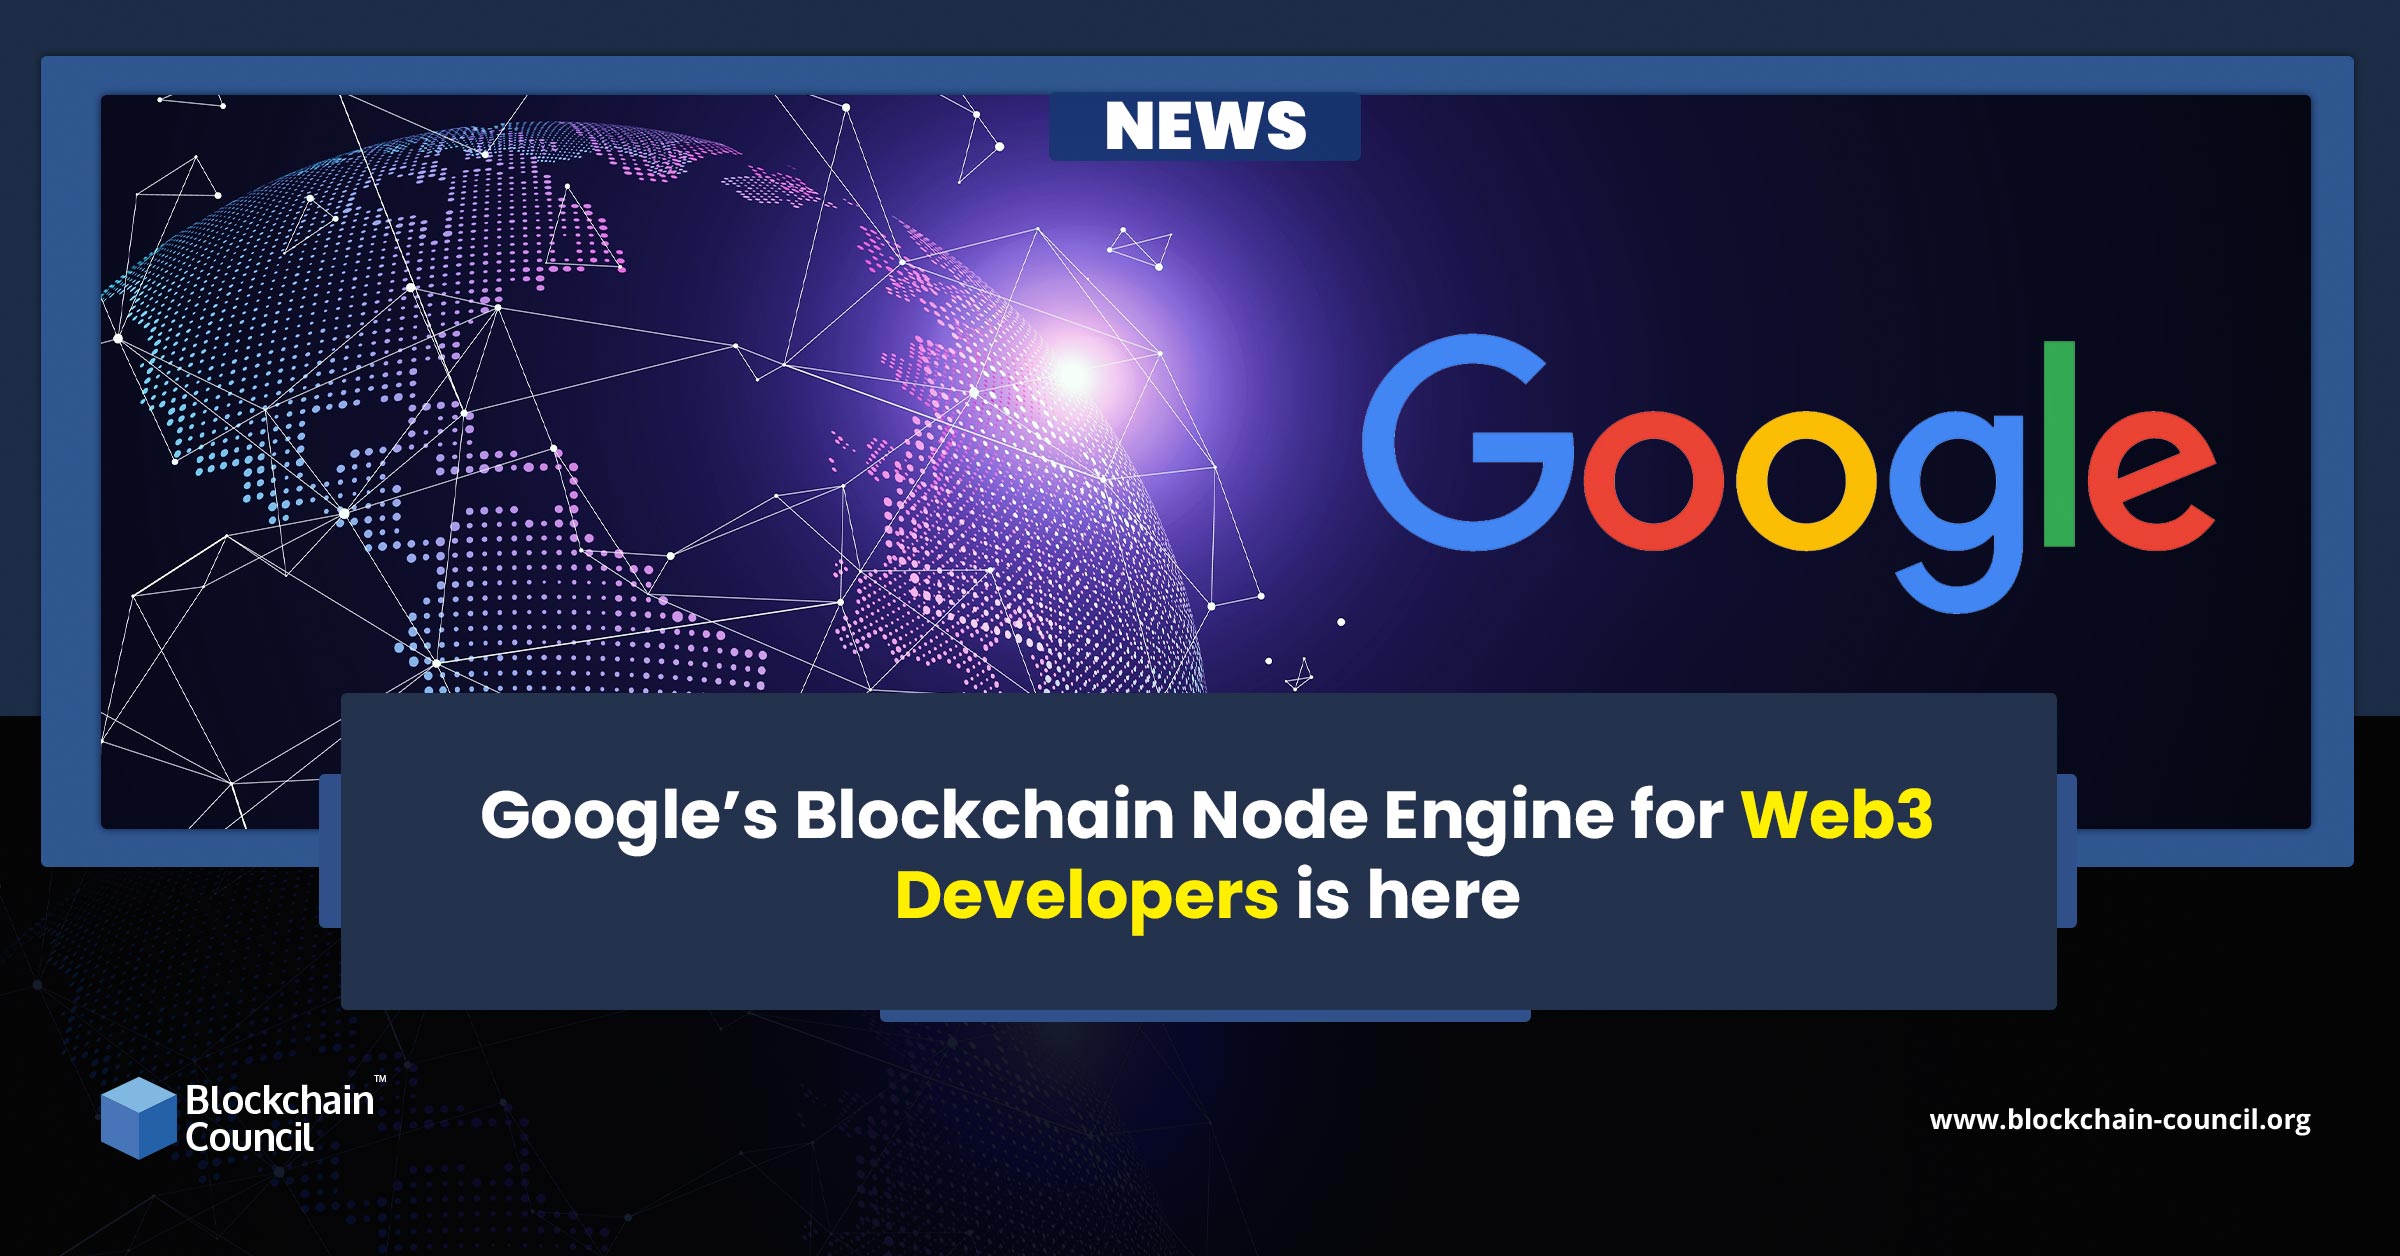 Google is aggressively taking on web3 space. With a new Blockchain Node Engine, the company is ready to take on web3 challenges and advantages.